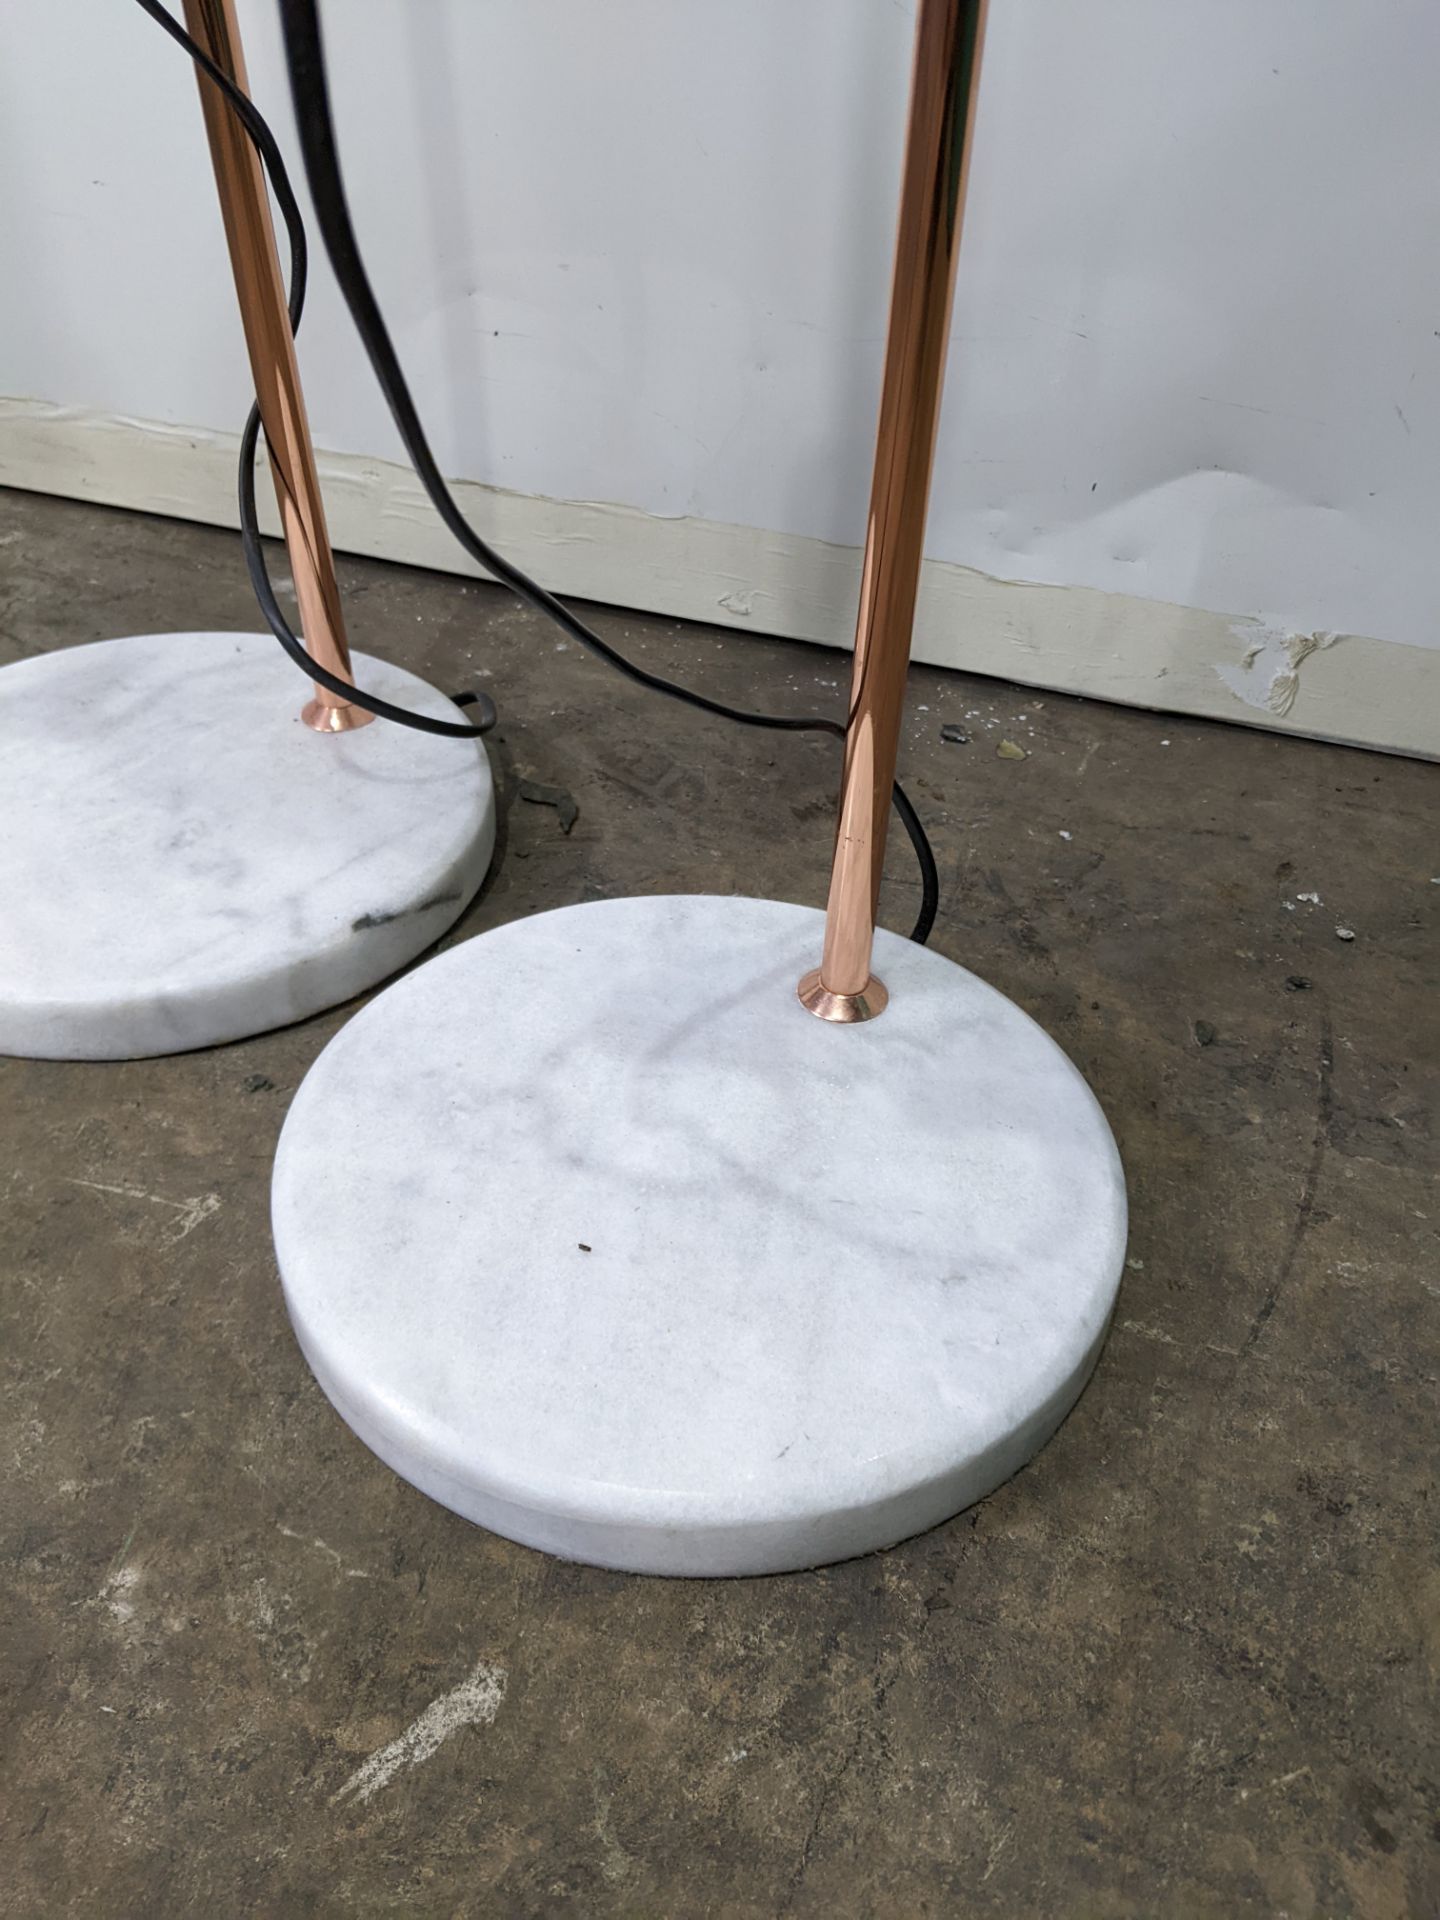 2 x Copper Effect Floor Lamps w/ Marble Effect Base - Image 5 of 5